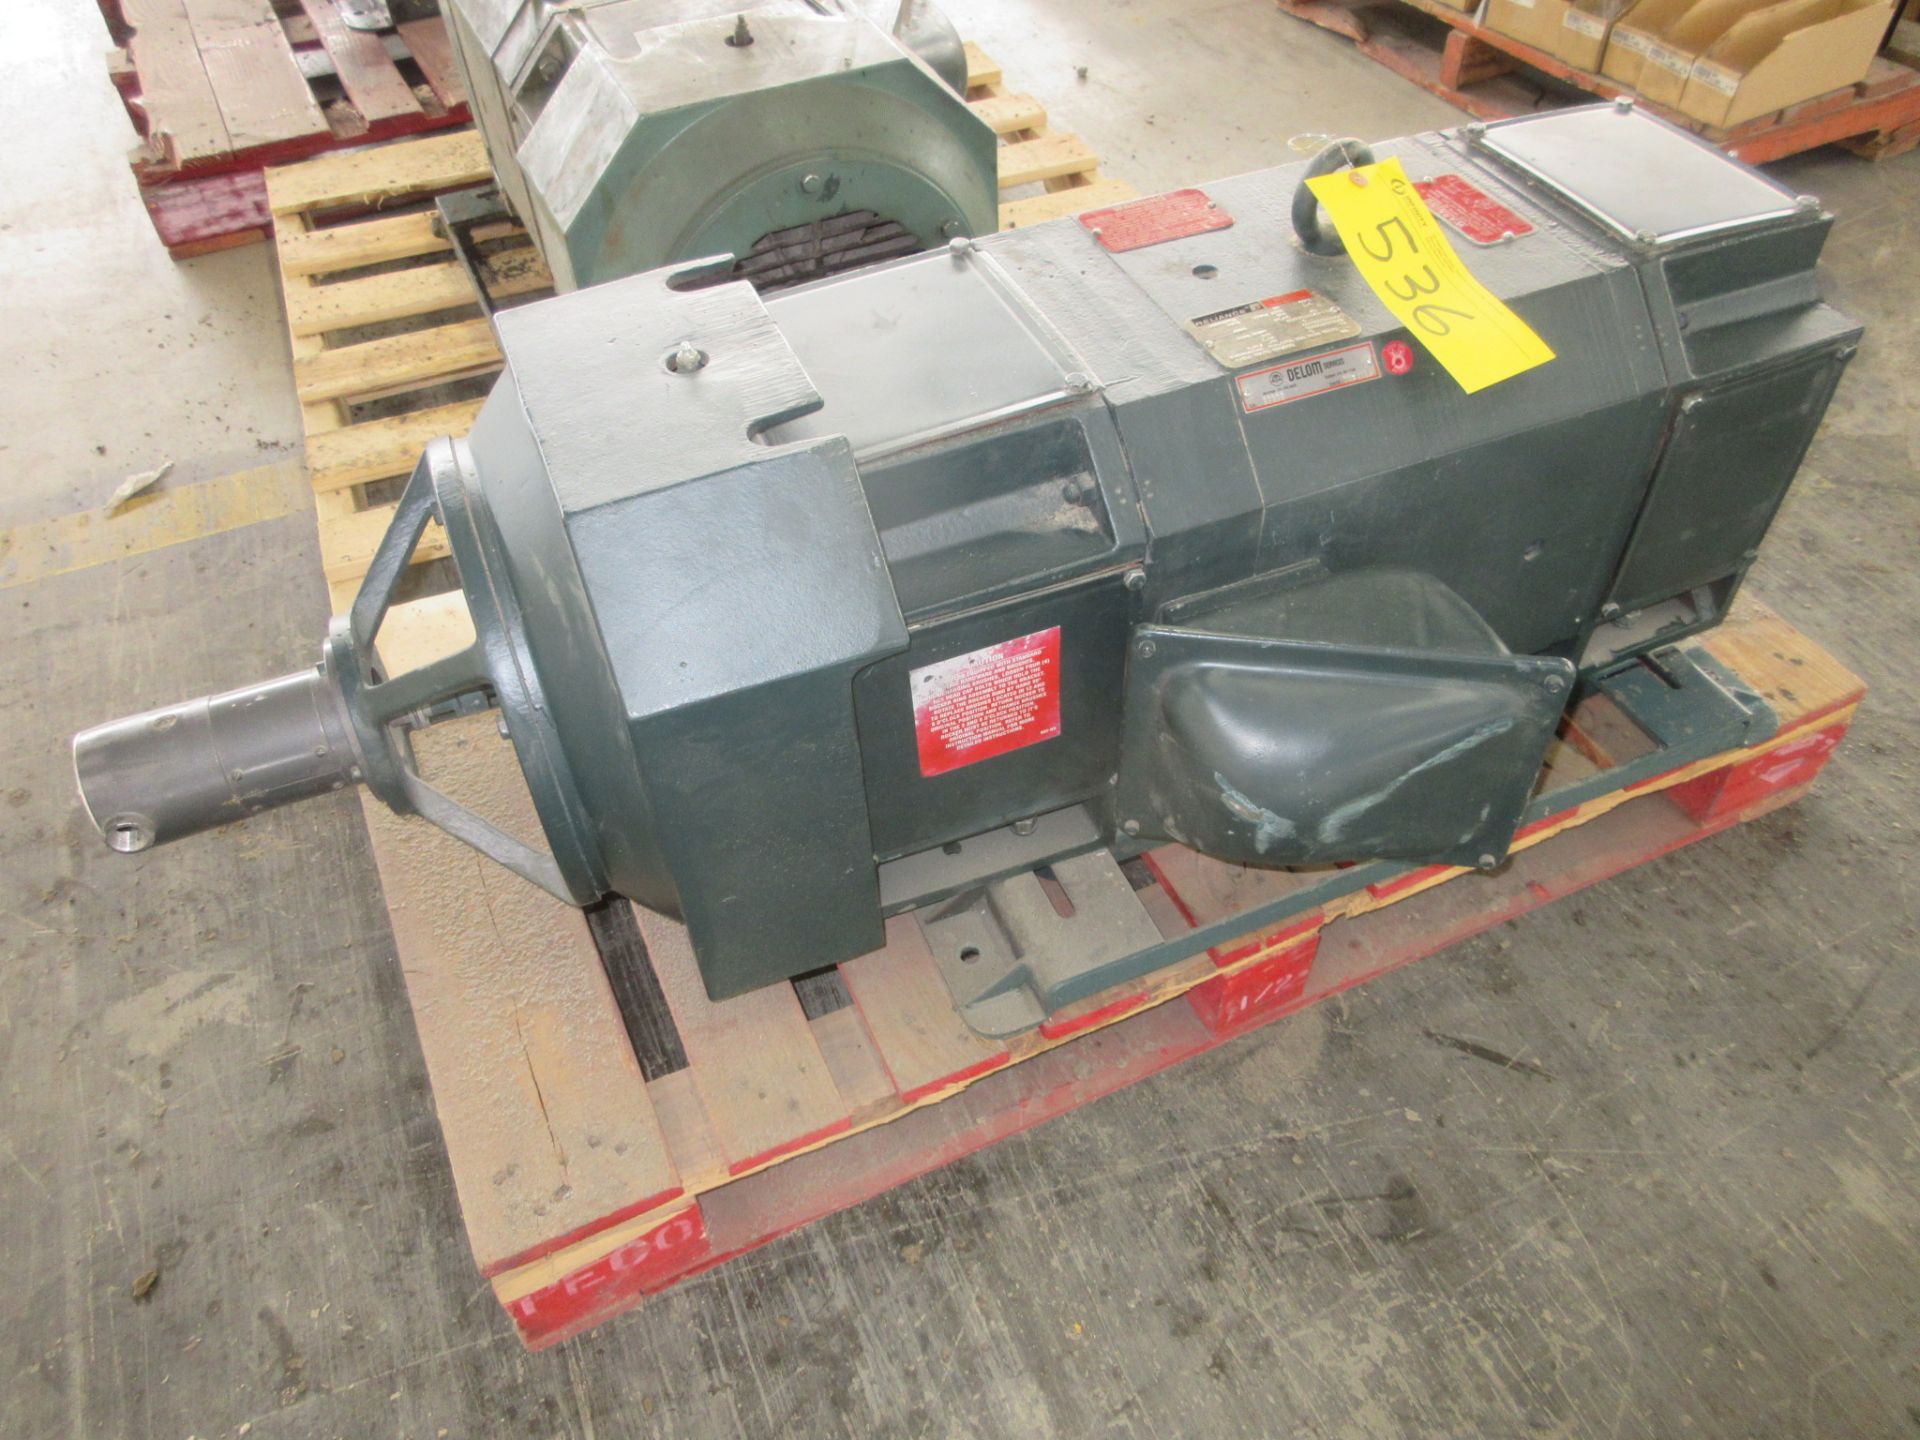 RELIANCE RPM III D-C MOTOR, 30HP, 500V, 1,750 / 2,300 RPM, LC2812AT2 FRAME (SOUTHWEST WAREHOUSE)